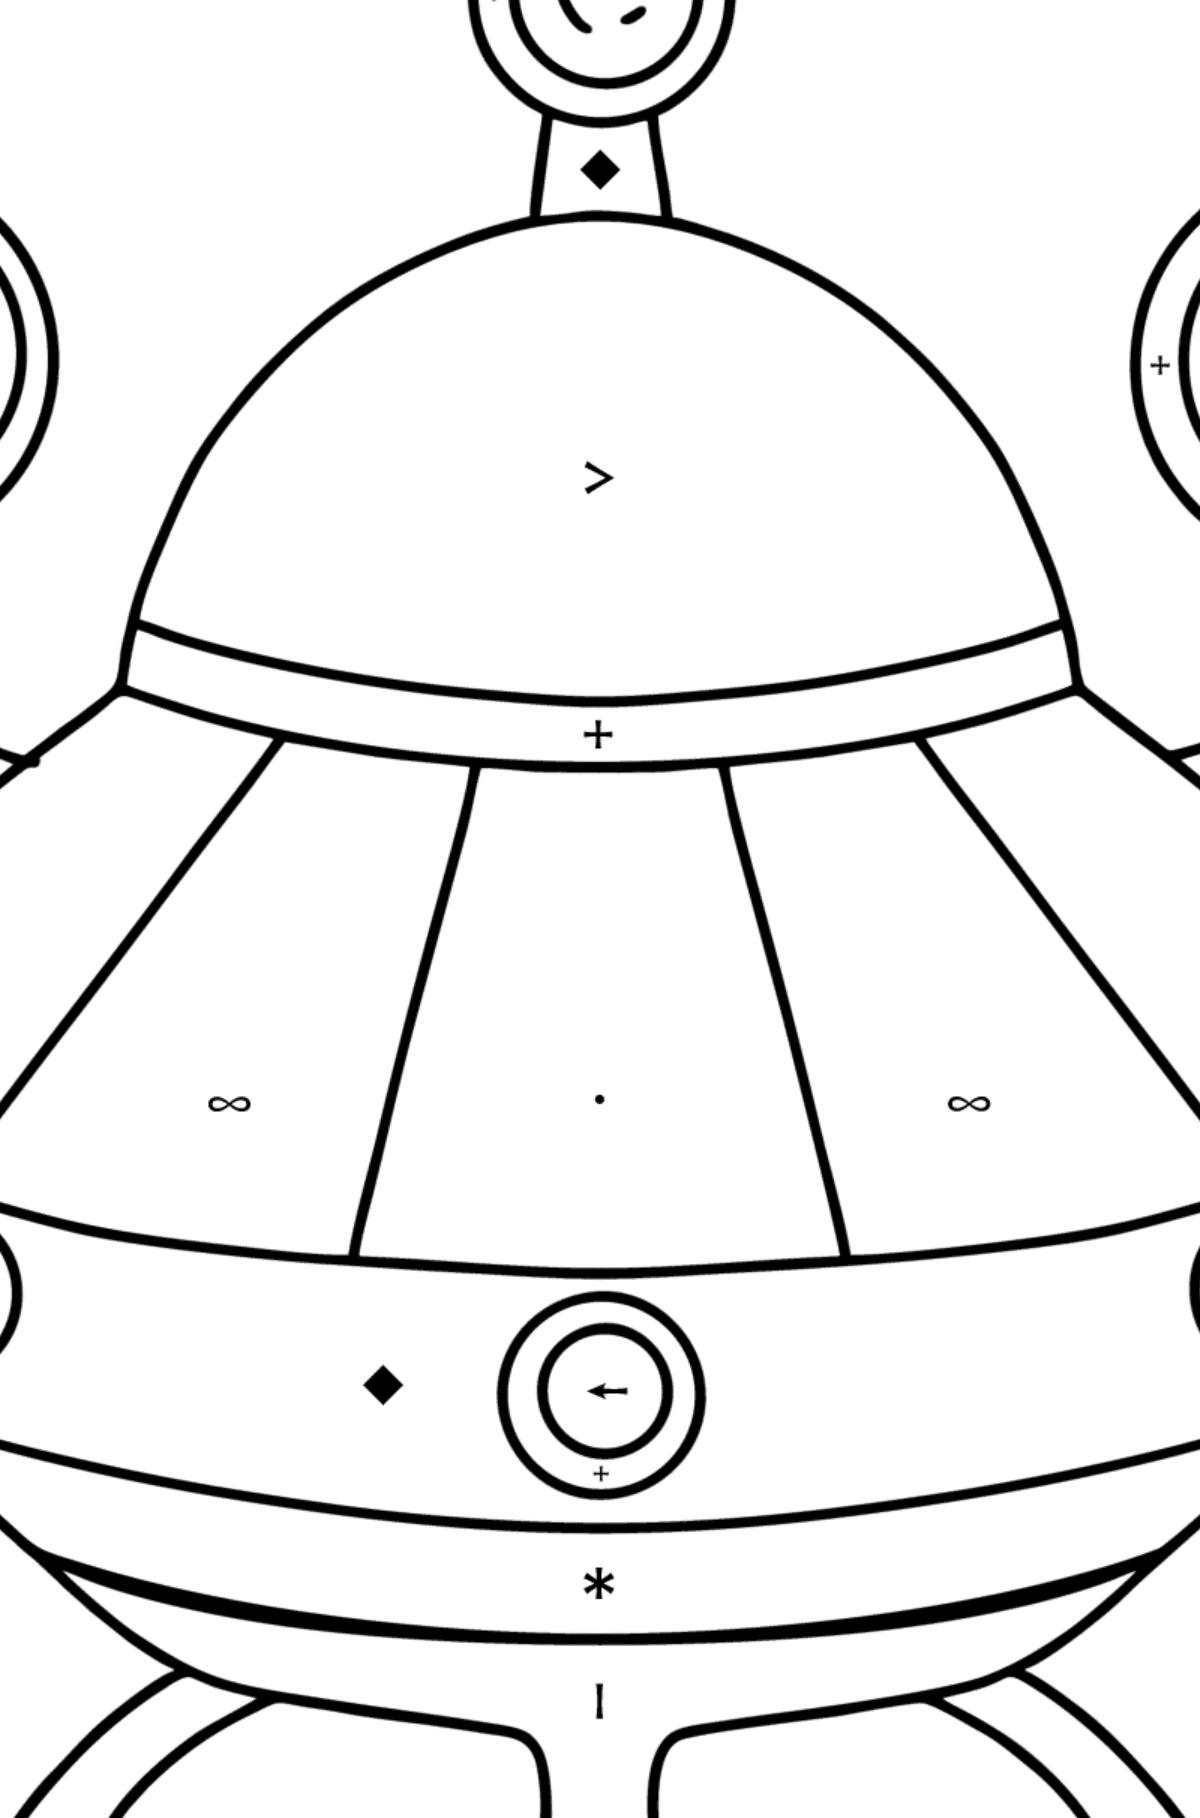 Alien spaceship coloring pages - Coloring by Symbols for Kids